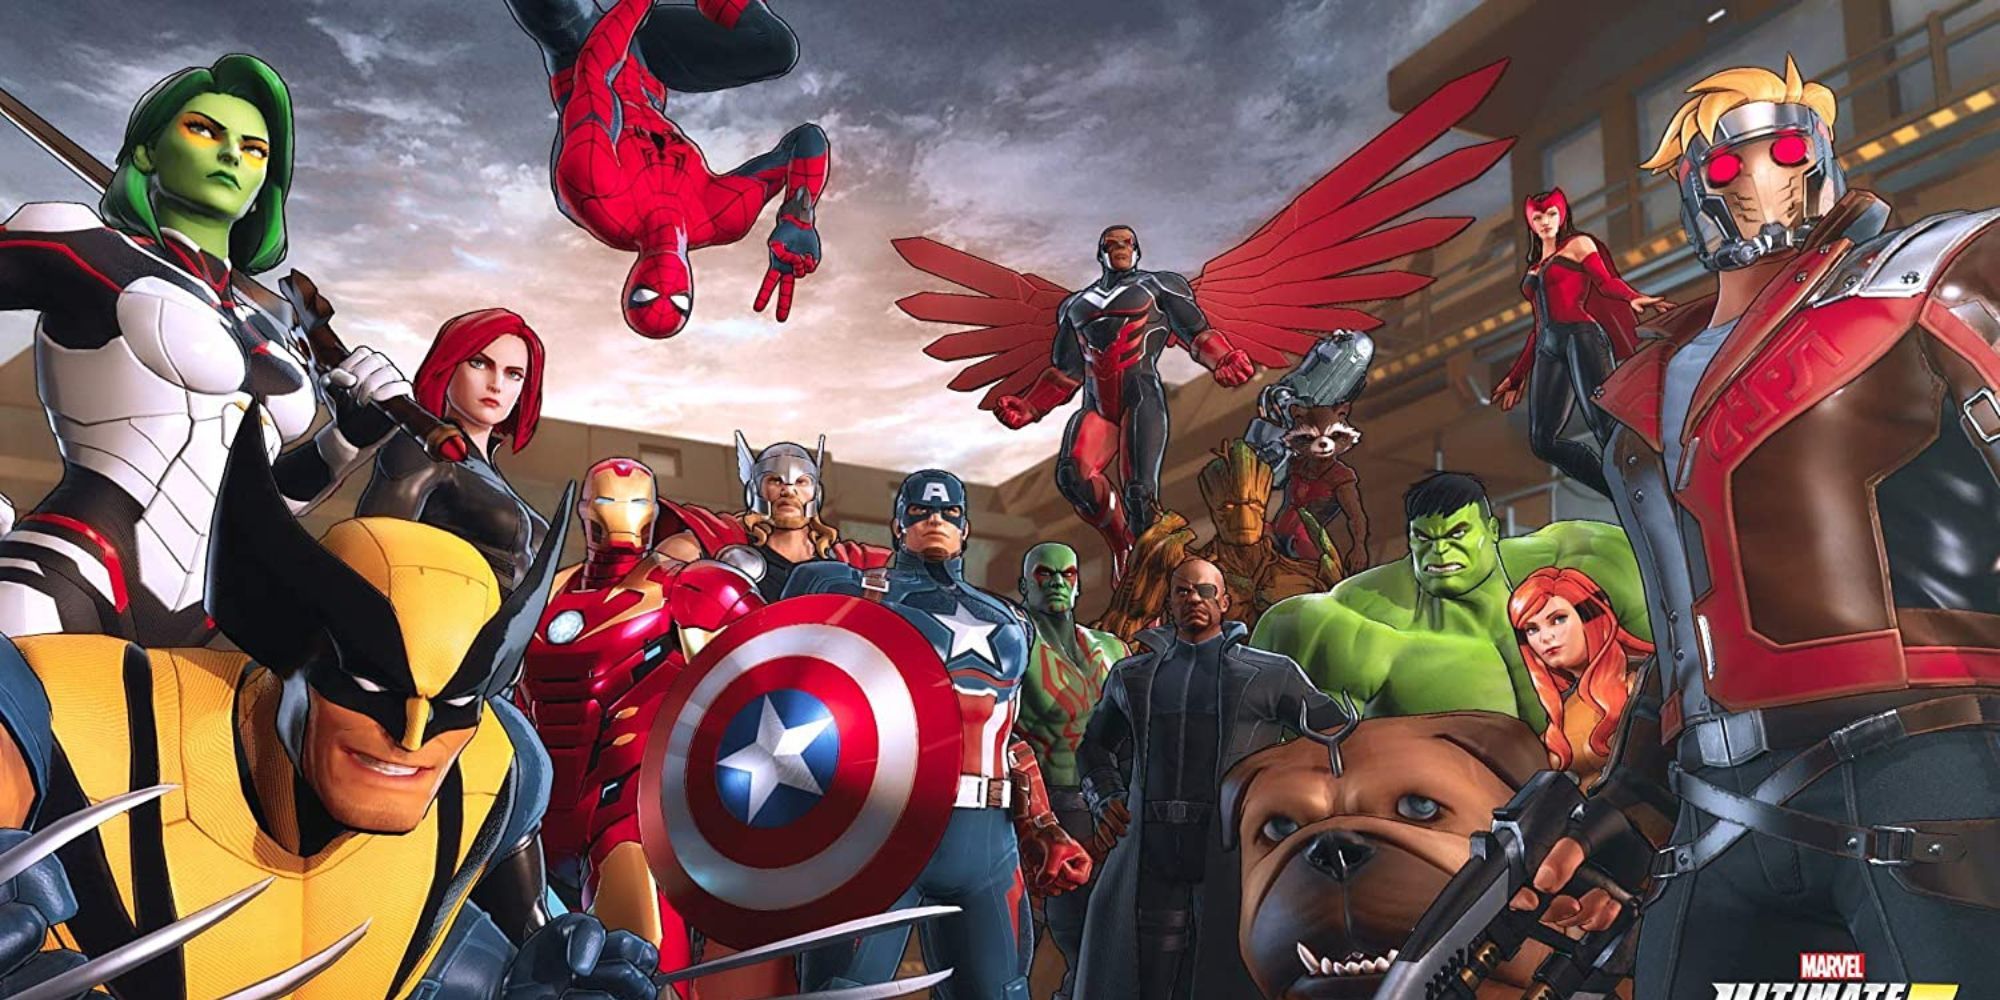 A large cast of Marvel characters pose together outside of a building